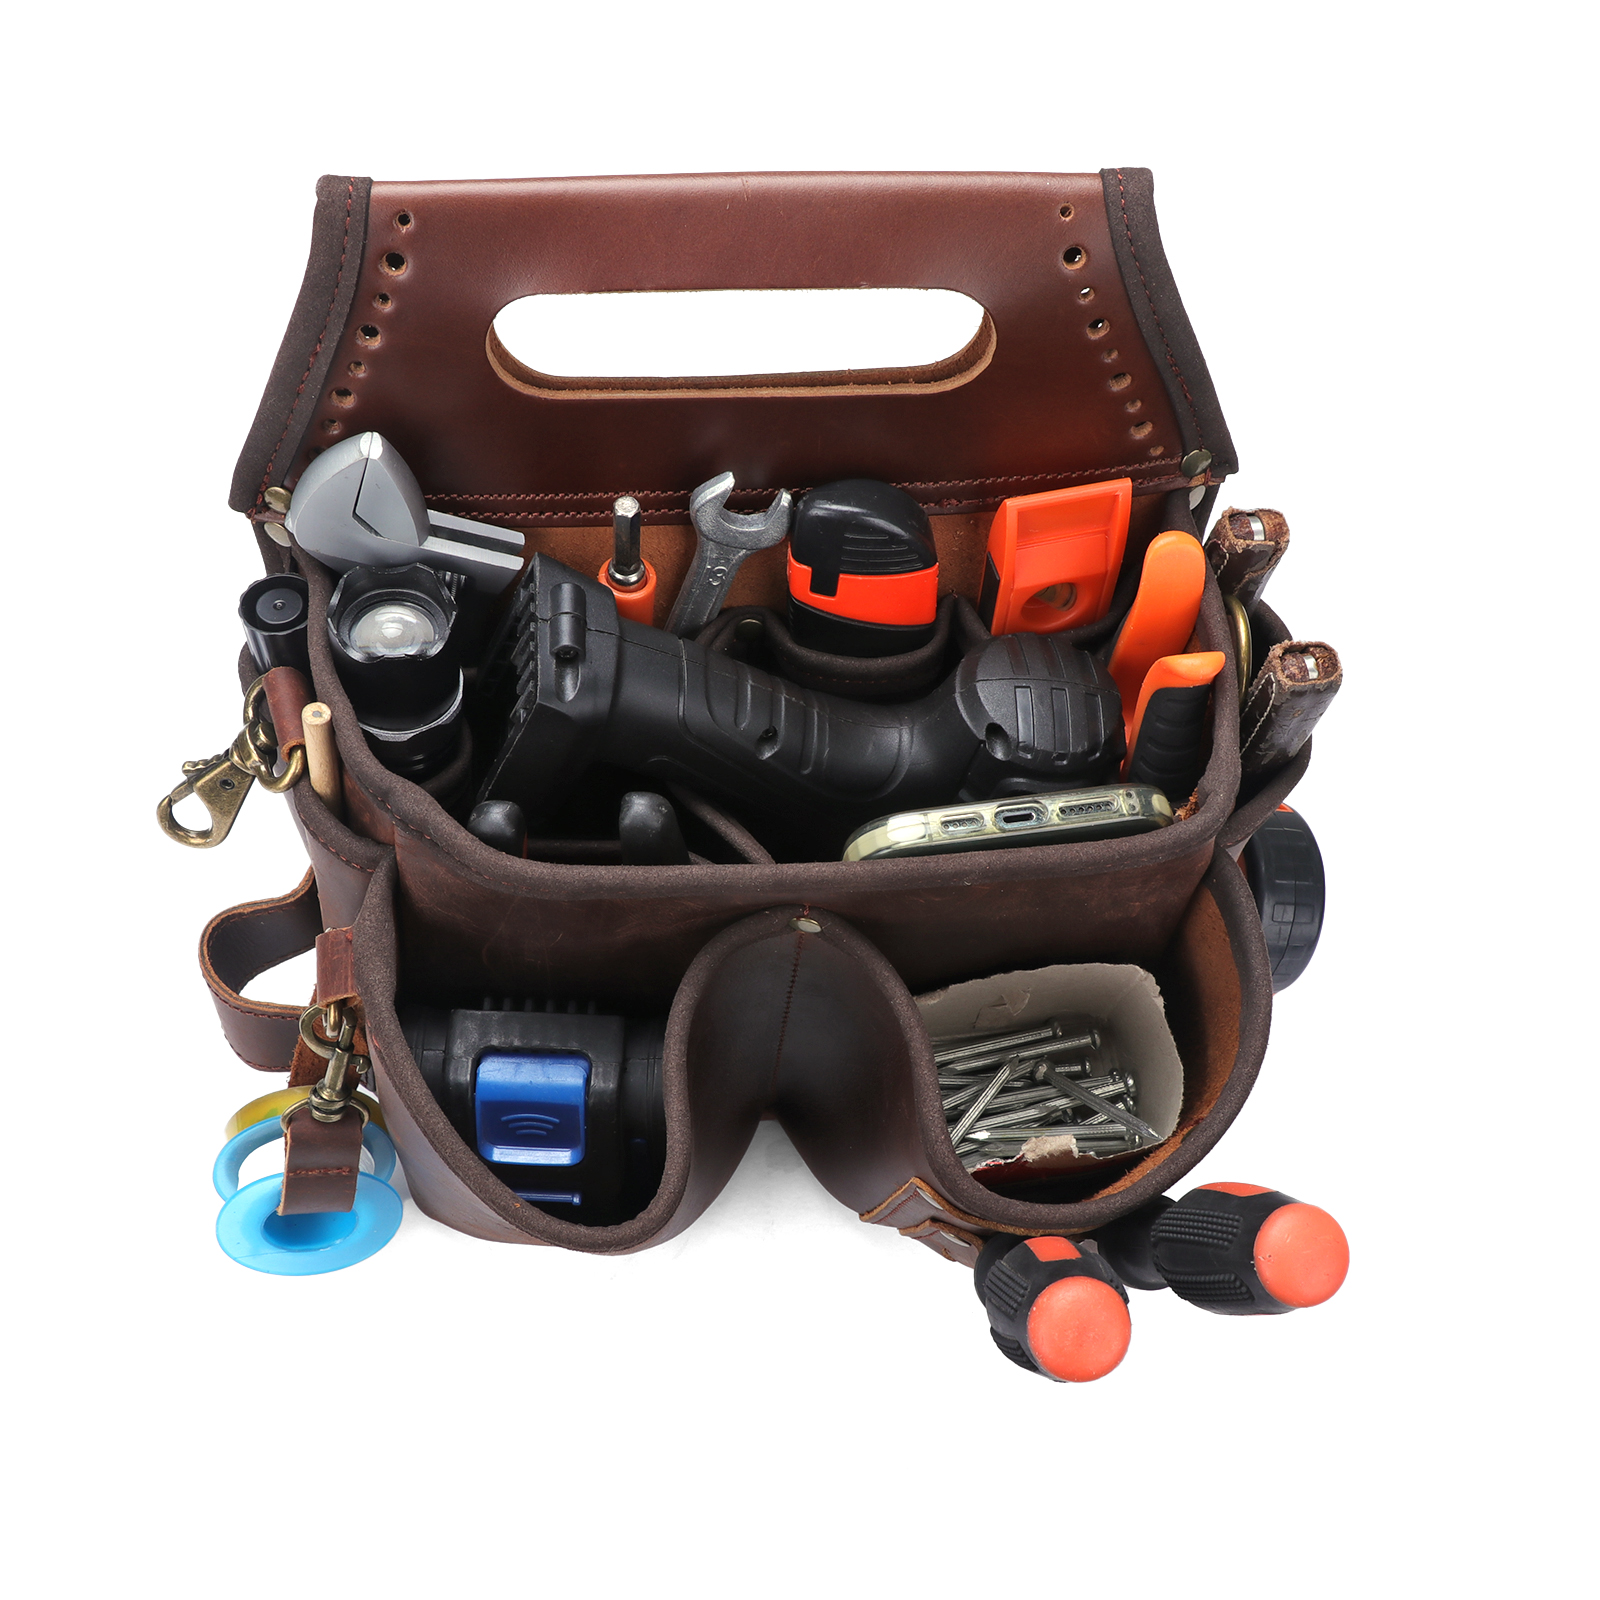 TOURBON Leather Work Tool Belt Pouch Tool Organiser Bag for Electricians Carpenters Builders